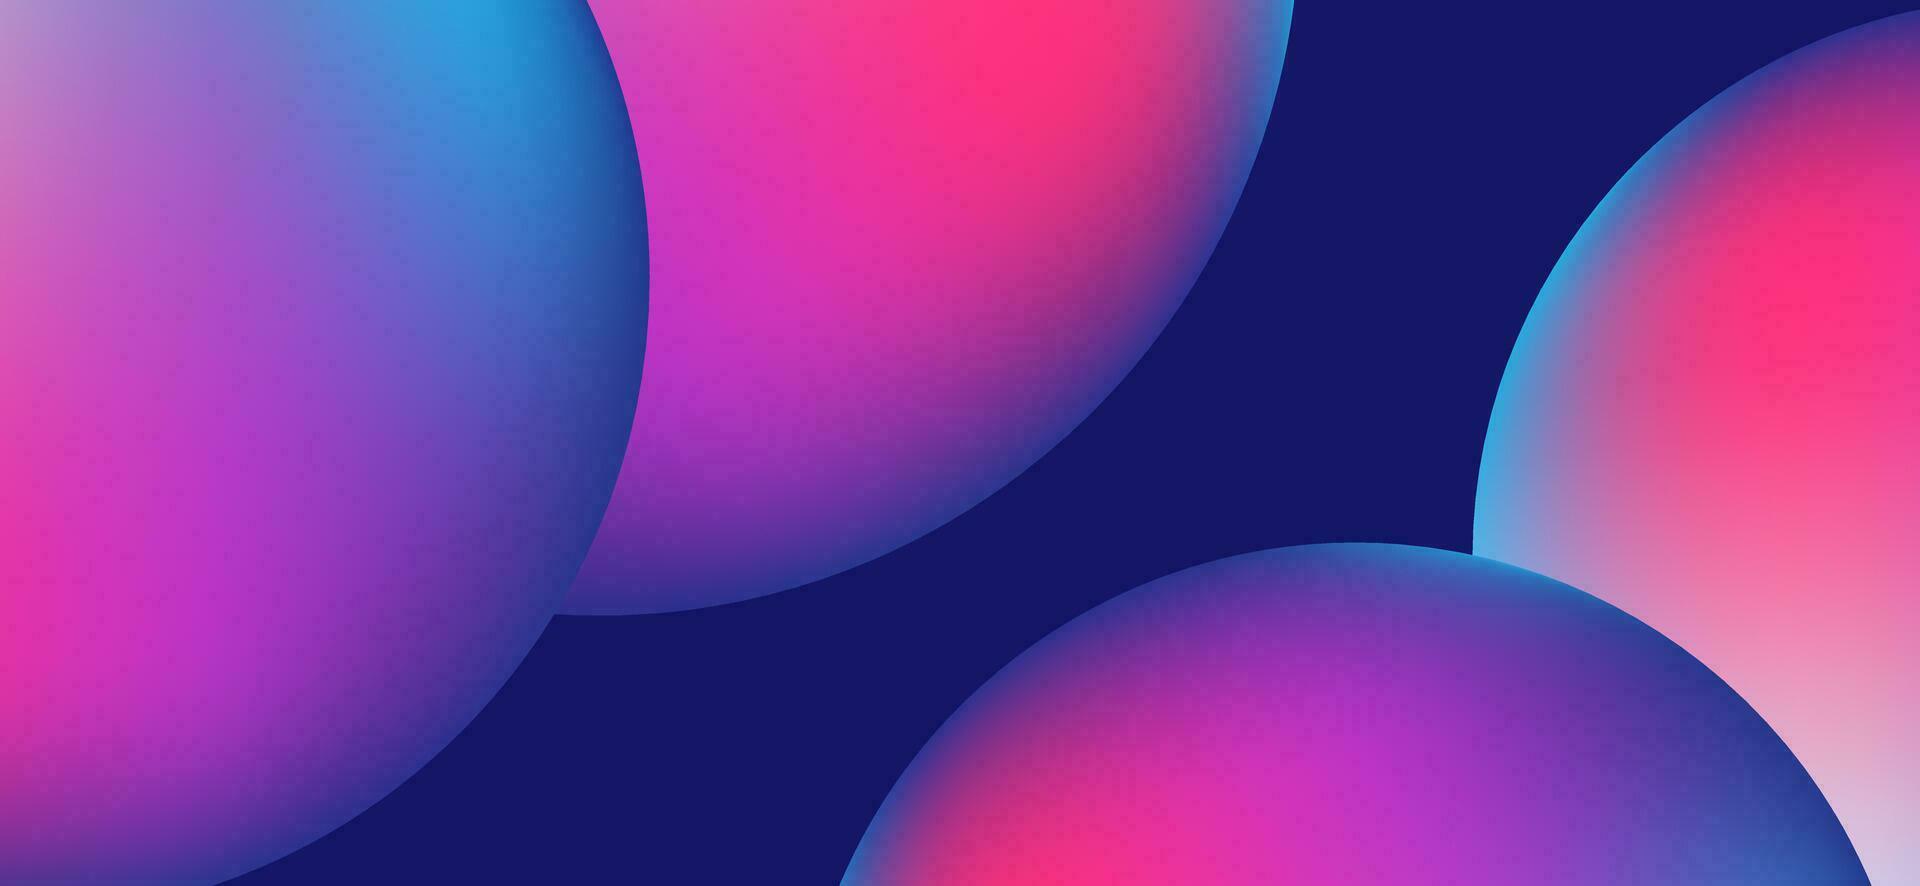 Multicolored abstract background design. Fluid gradient circle shapes composition. Futuristic design landing page, cover, banner, ads, social media, presentation concept. vector